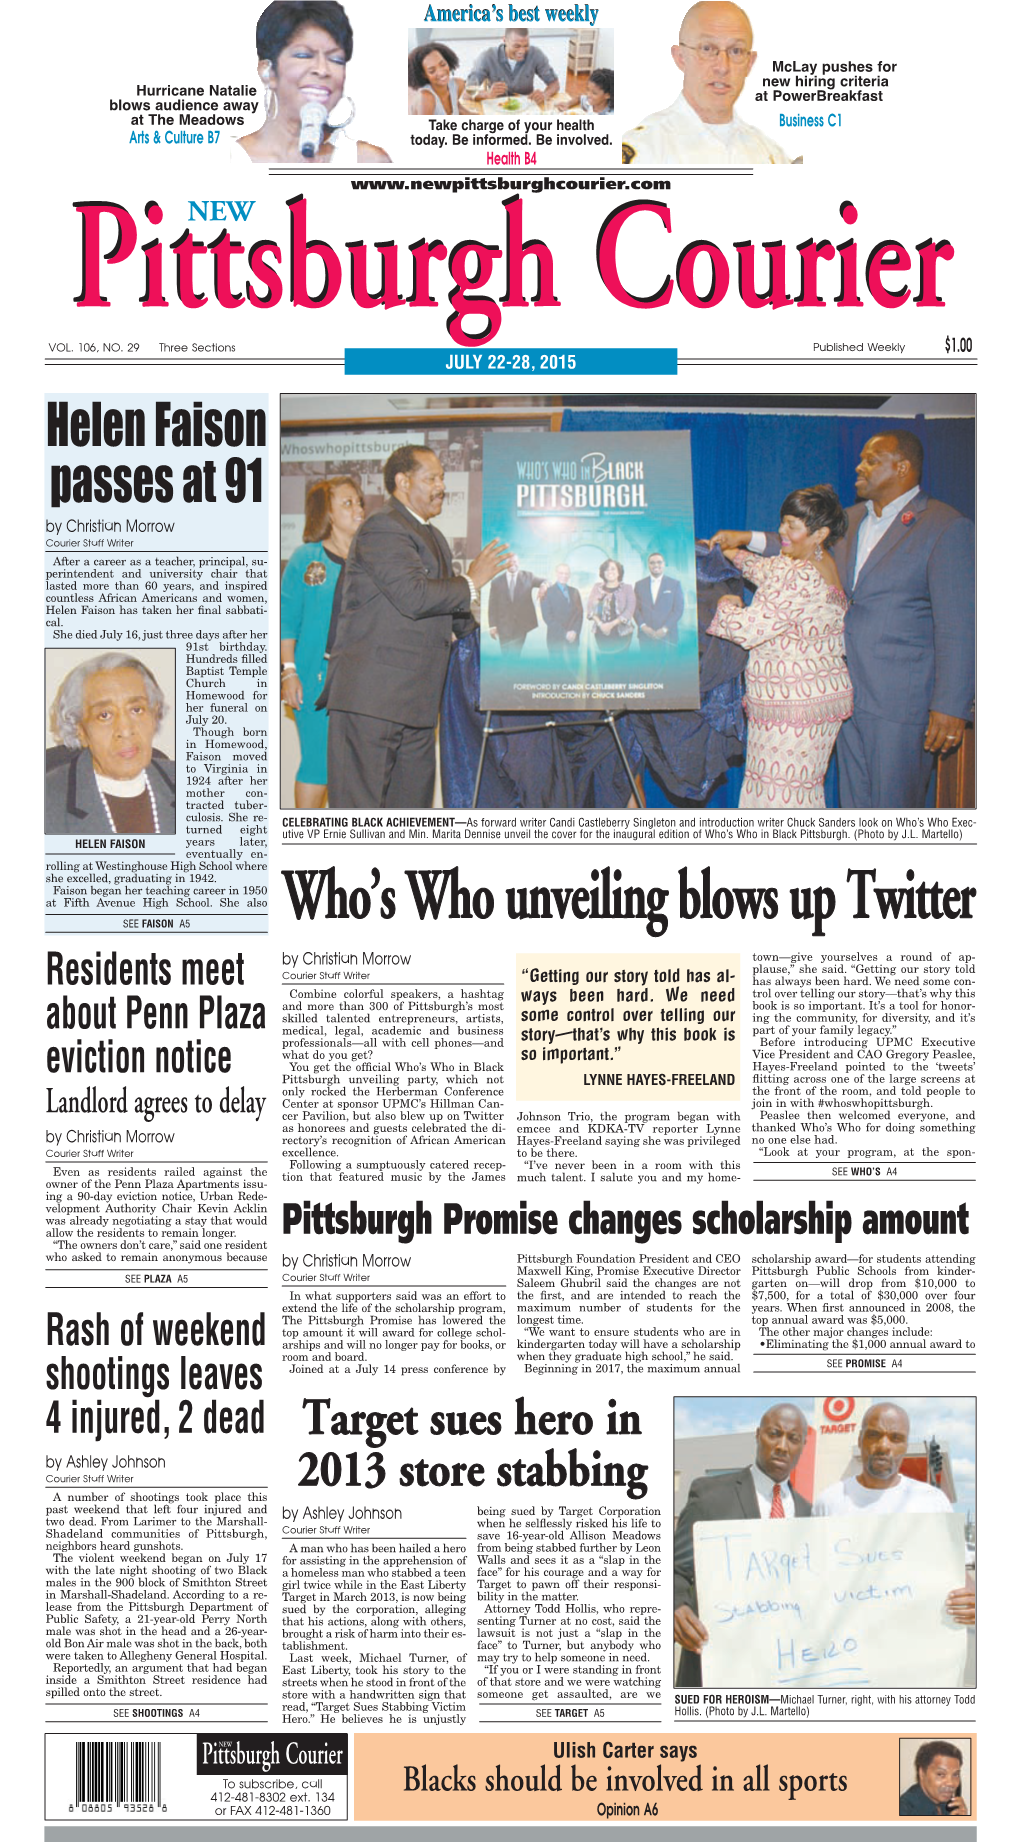 NEW PITTSBURGH COURIER Who’S Who Unveiling Blows up Twitter